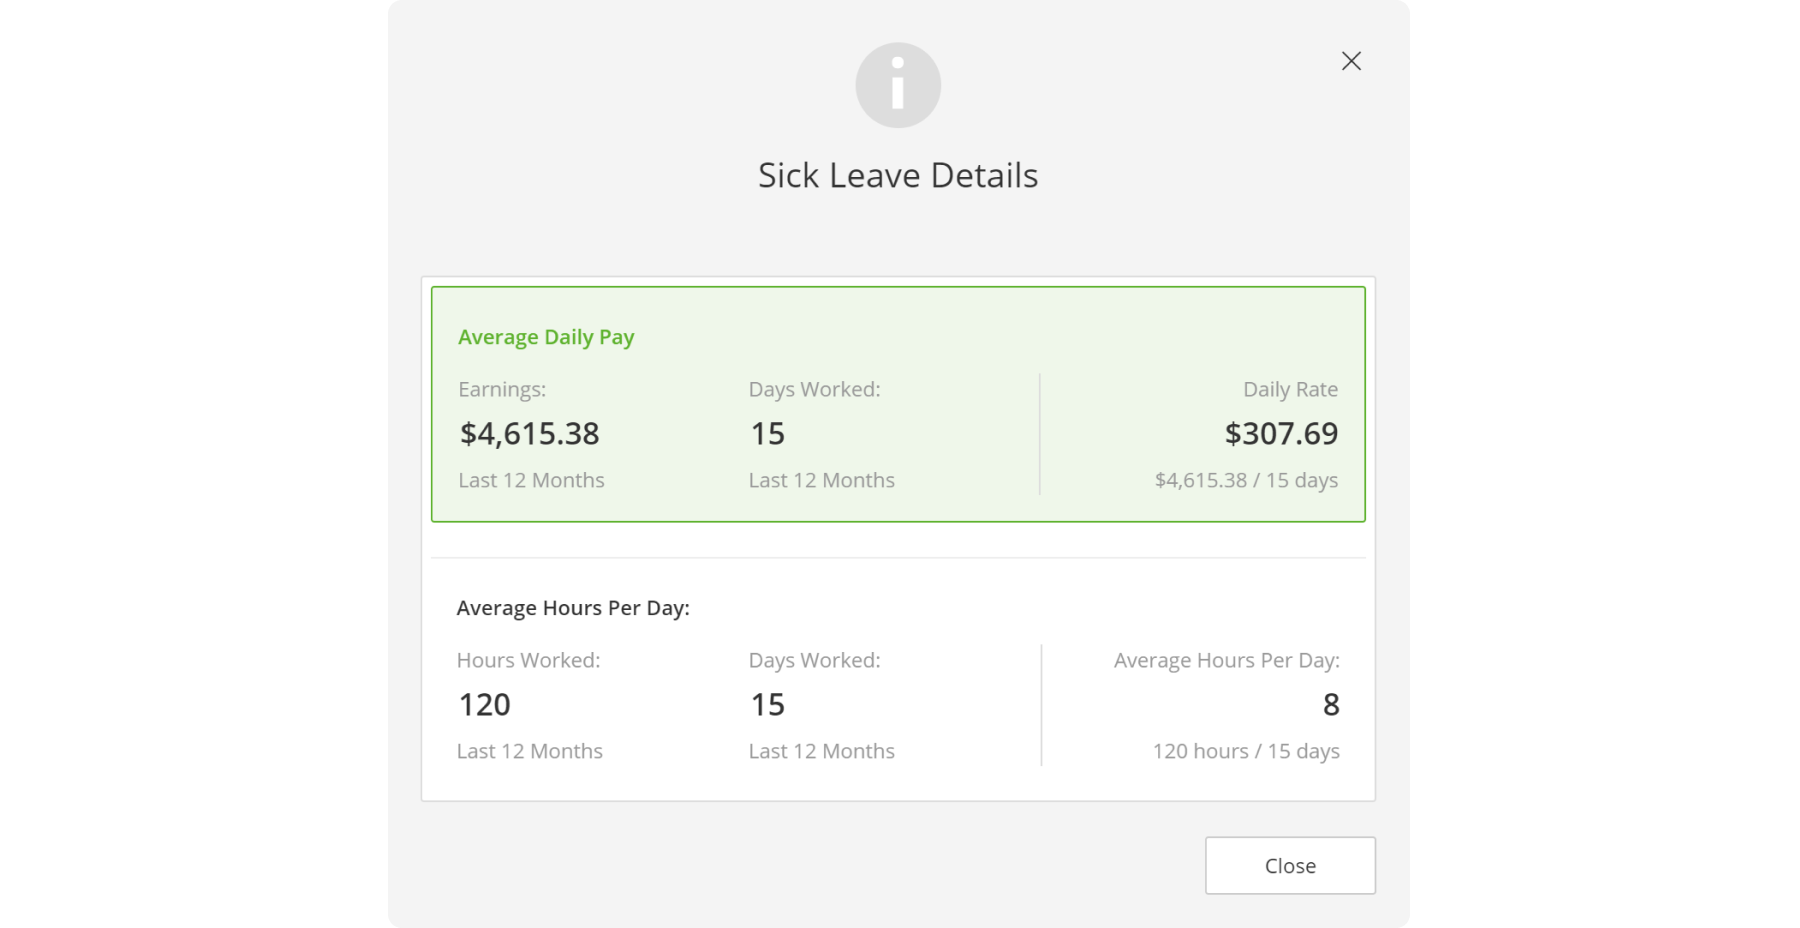 Average Daily Pay